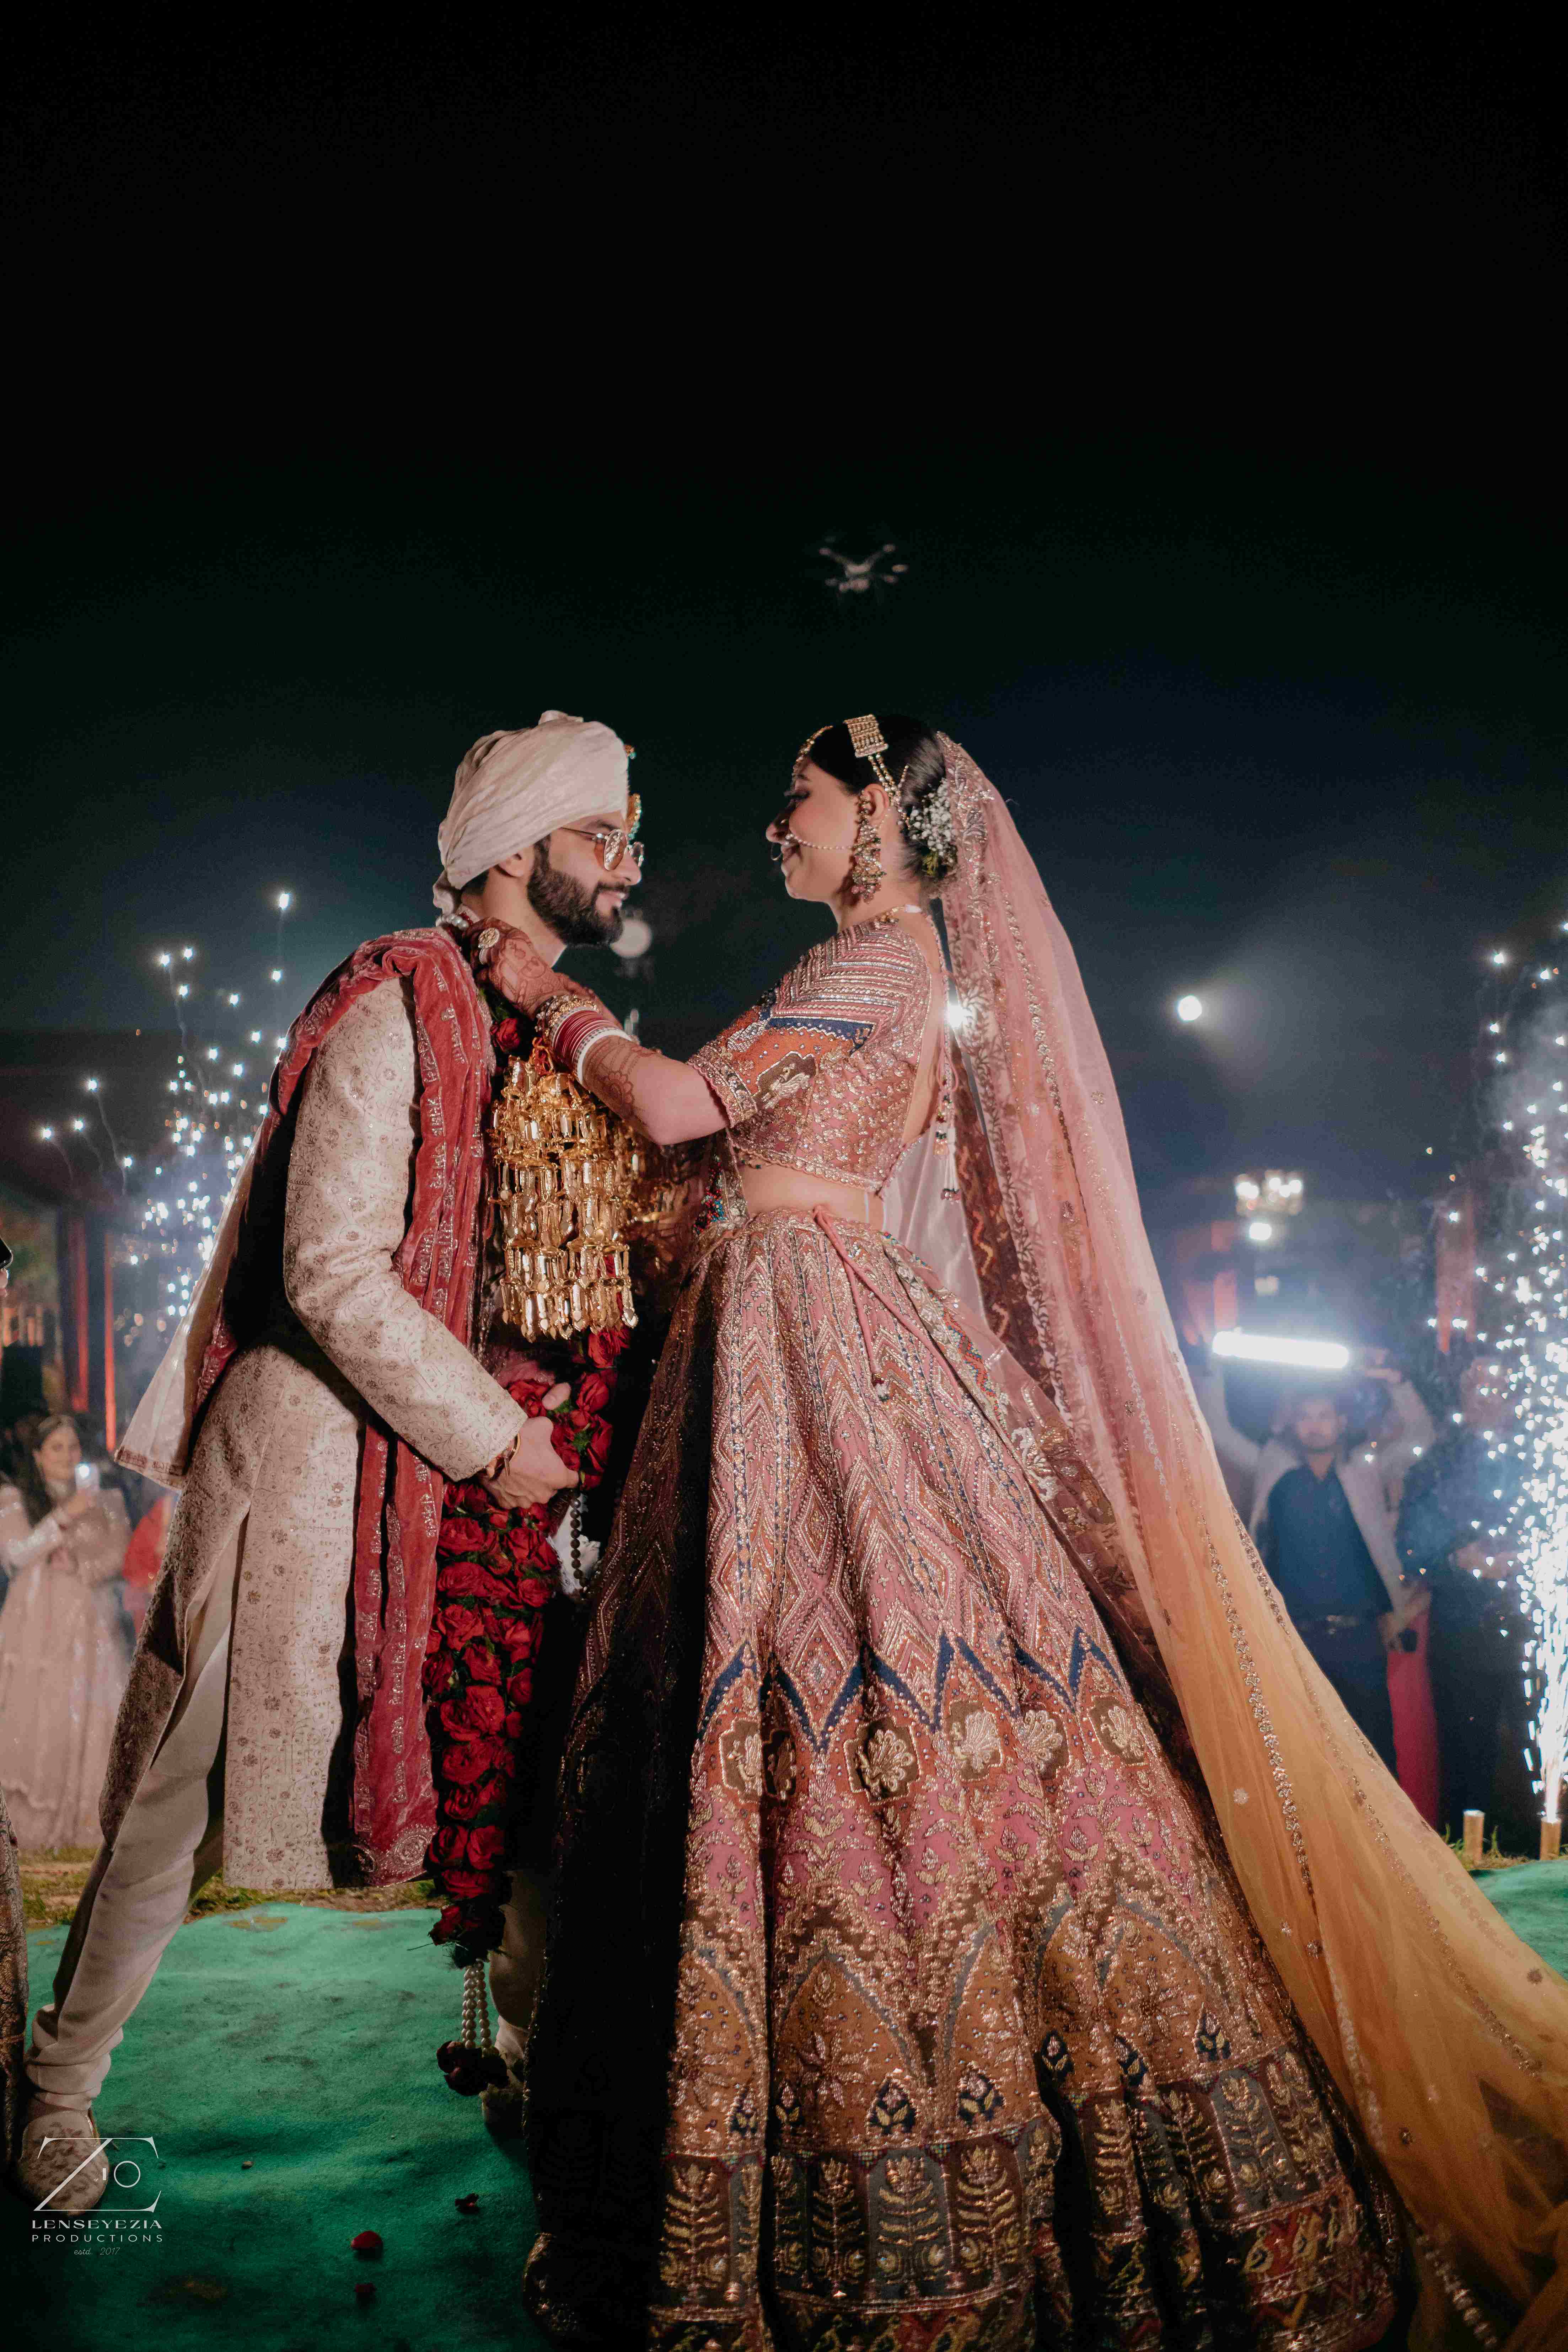 Blogger Couple Gouri And Arjun’s Wedding Was Full Of Fun And Glam!